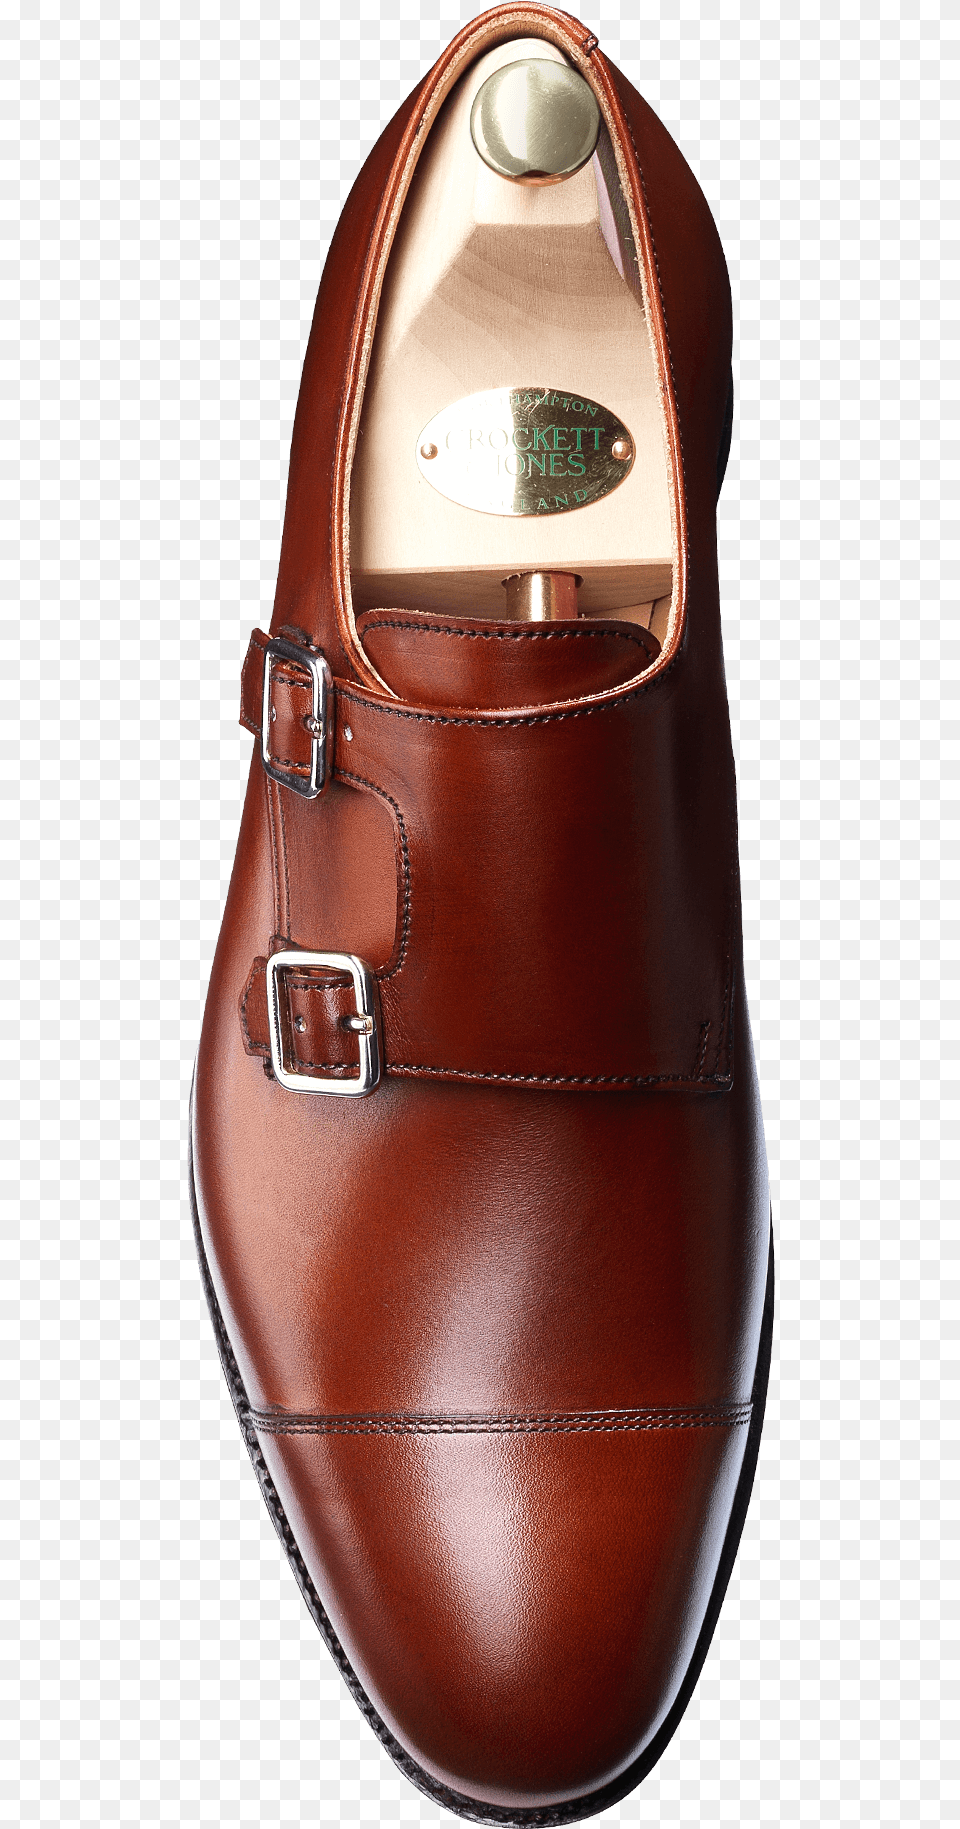 All Goodyear Welted Shoes Amp Boots Are 100 Made In Crockett And Jones Dorset, Clothing, Footwear, Shoe, Accessories Free Transparent Png